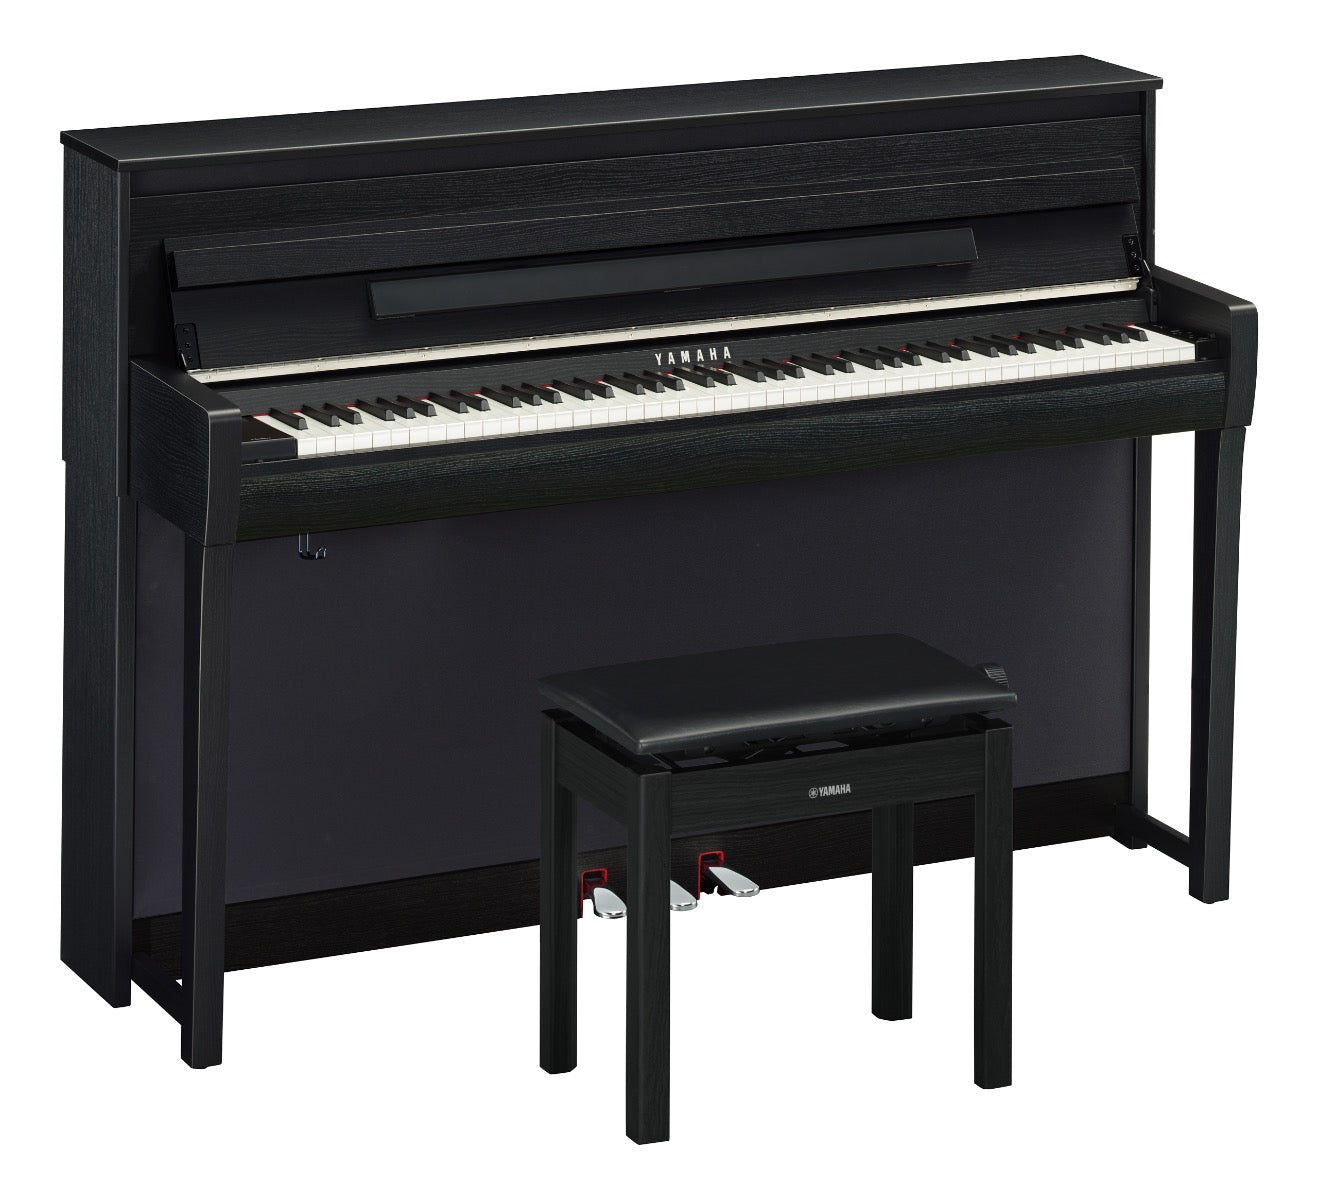 3/4 view of Yamaha Clavinova CLP-785 Digital Piano - Matte Black with bench showing front, top and left side